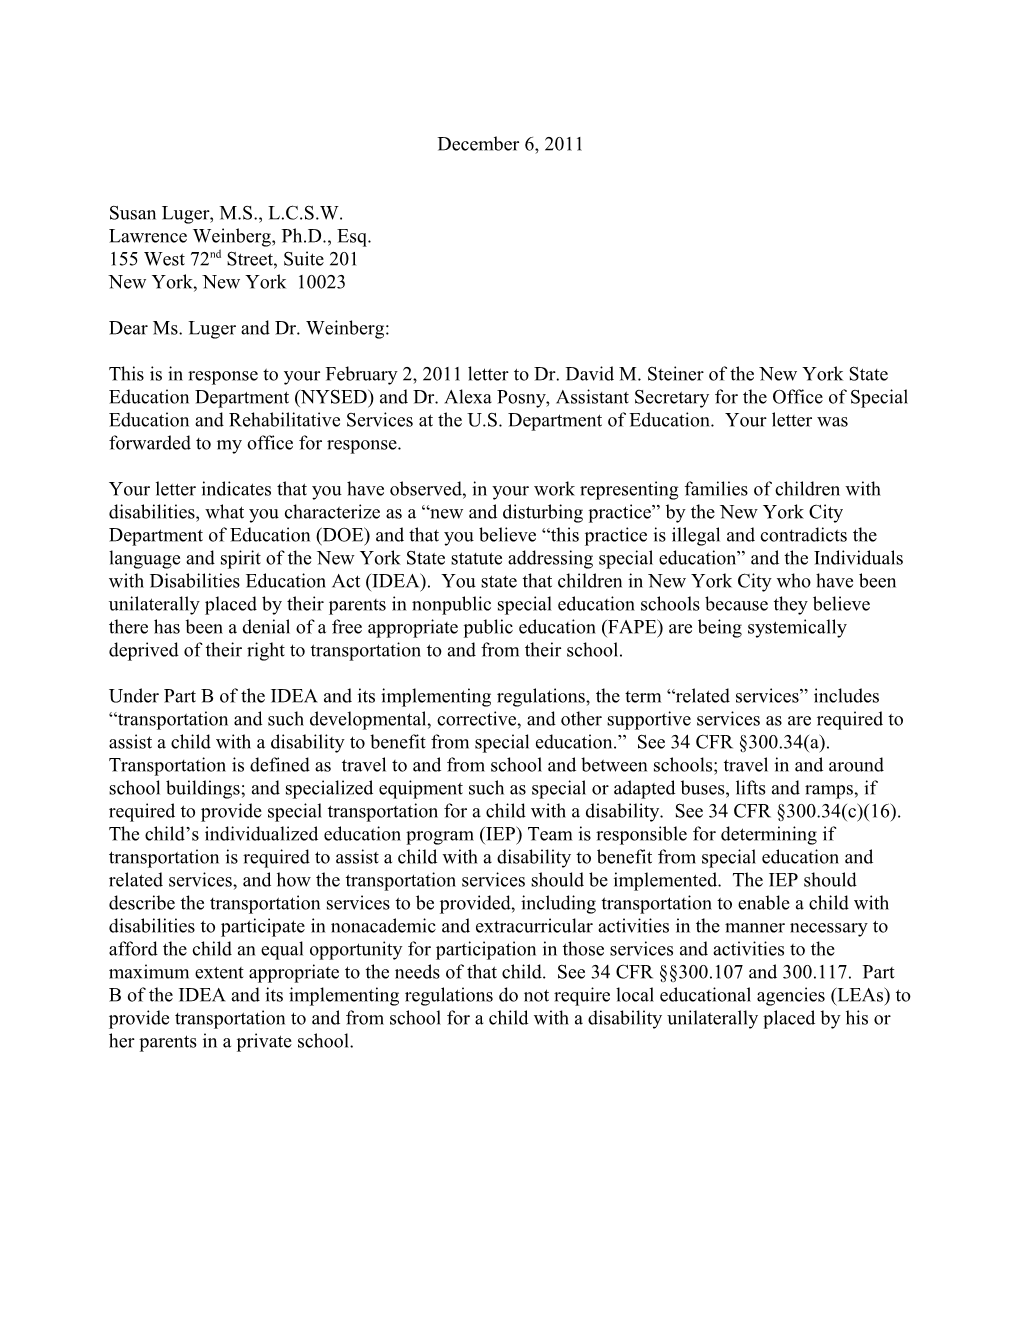 Luger Weinberg Letter Dated 12/06/11 Re Private School Transportation (Word)